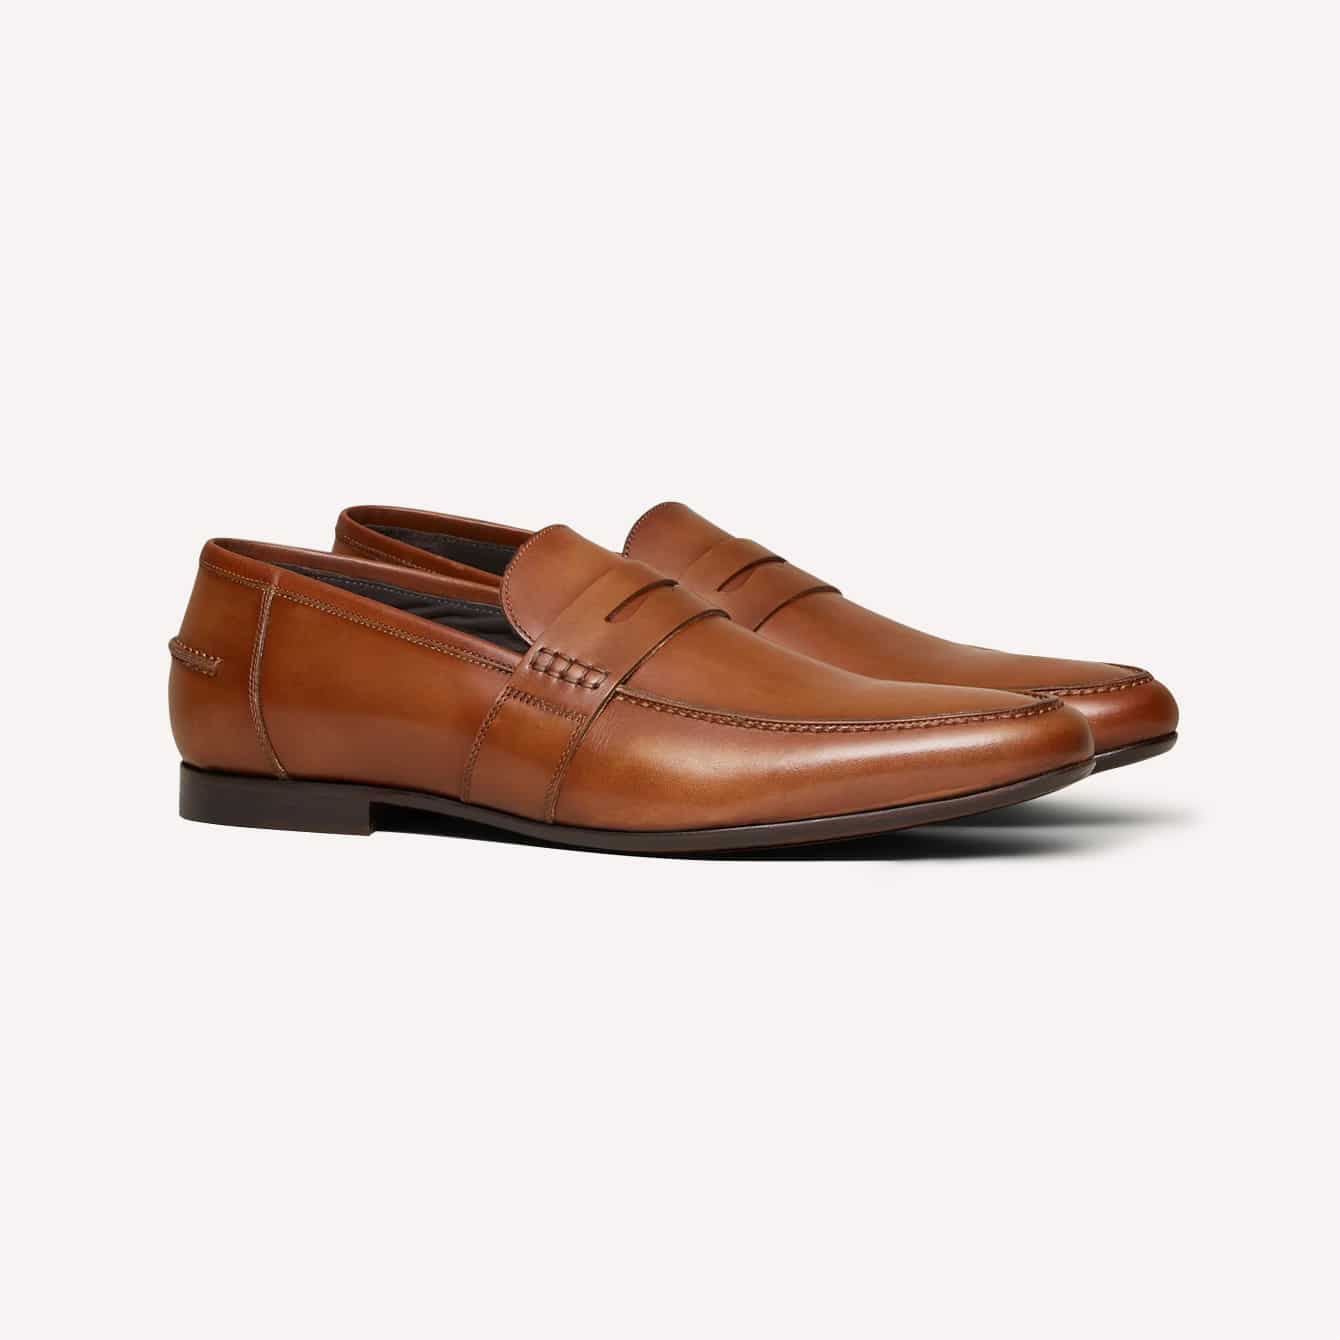 6 Best Horsebit Loafers for Men (For Any Budget) - The Modest Man